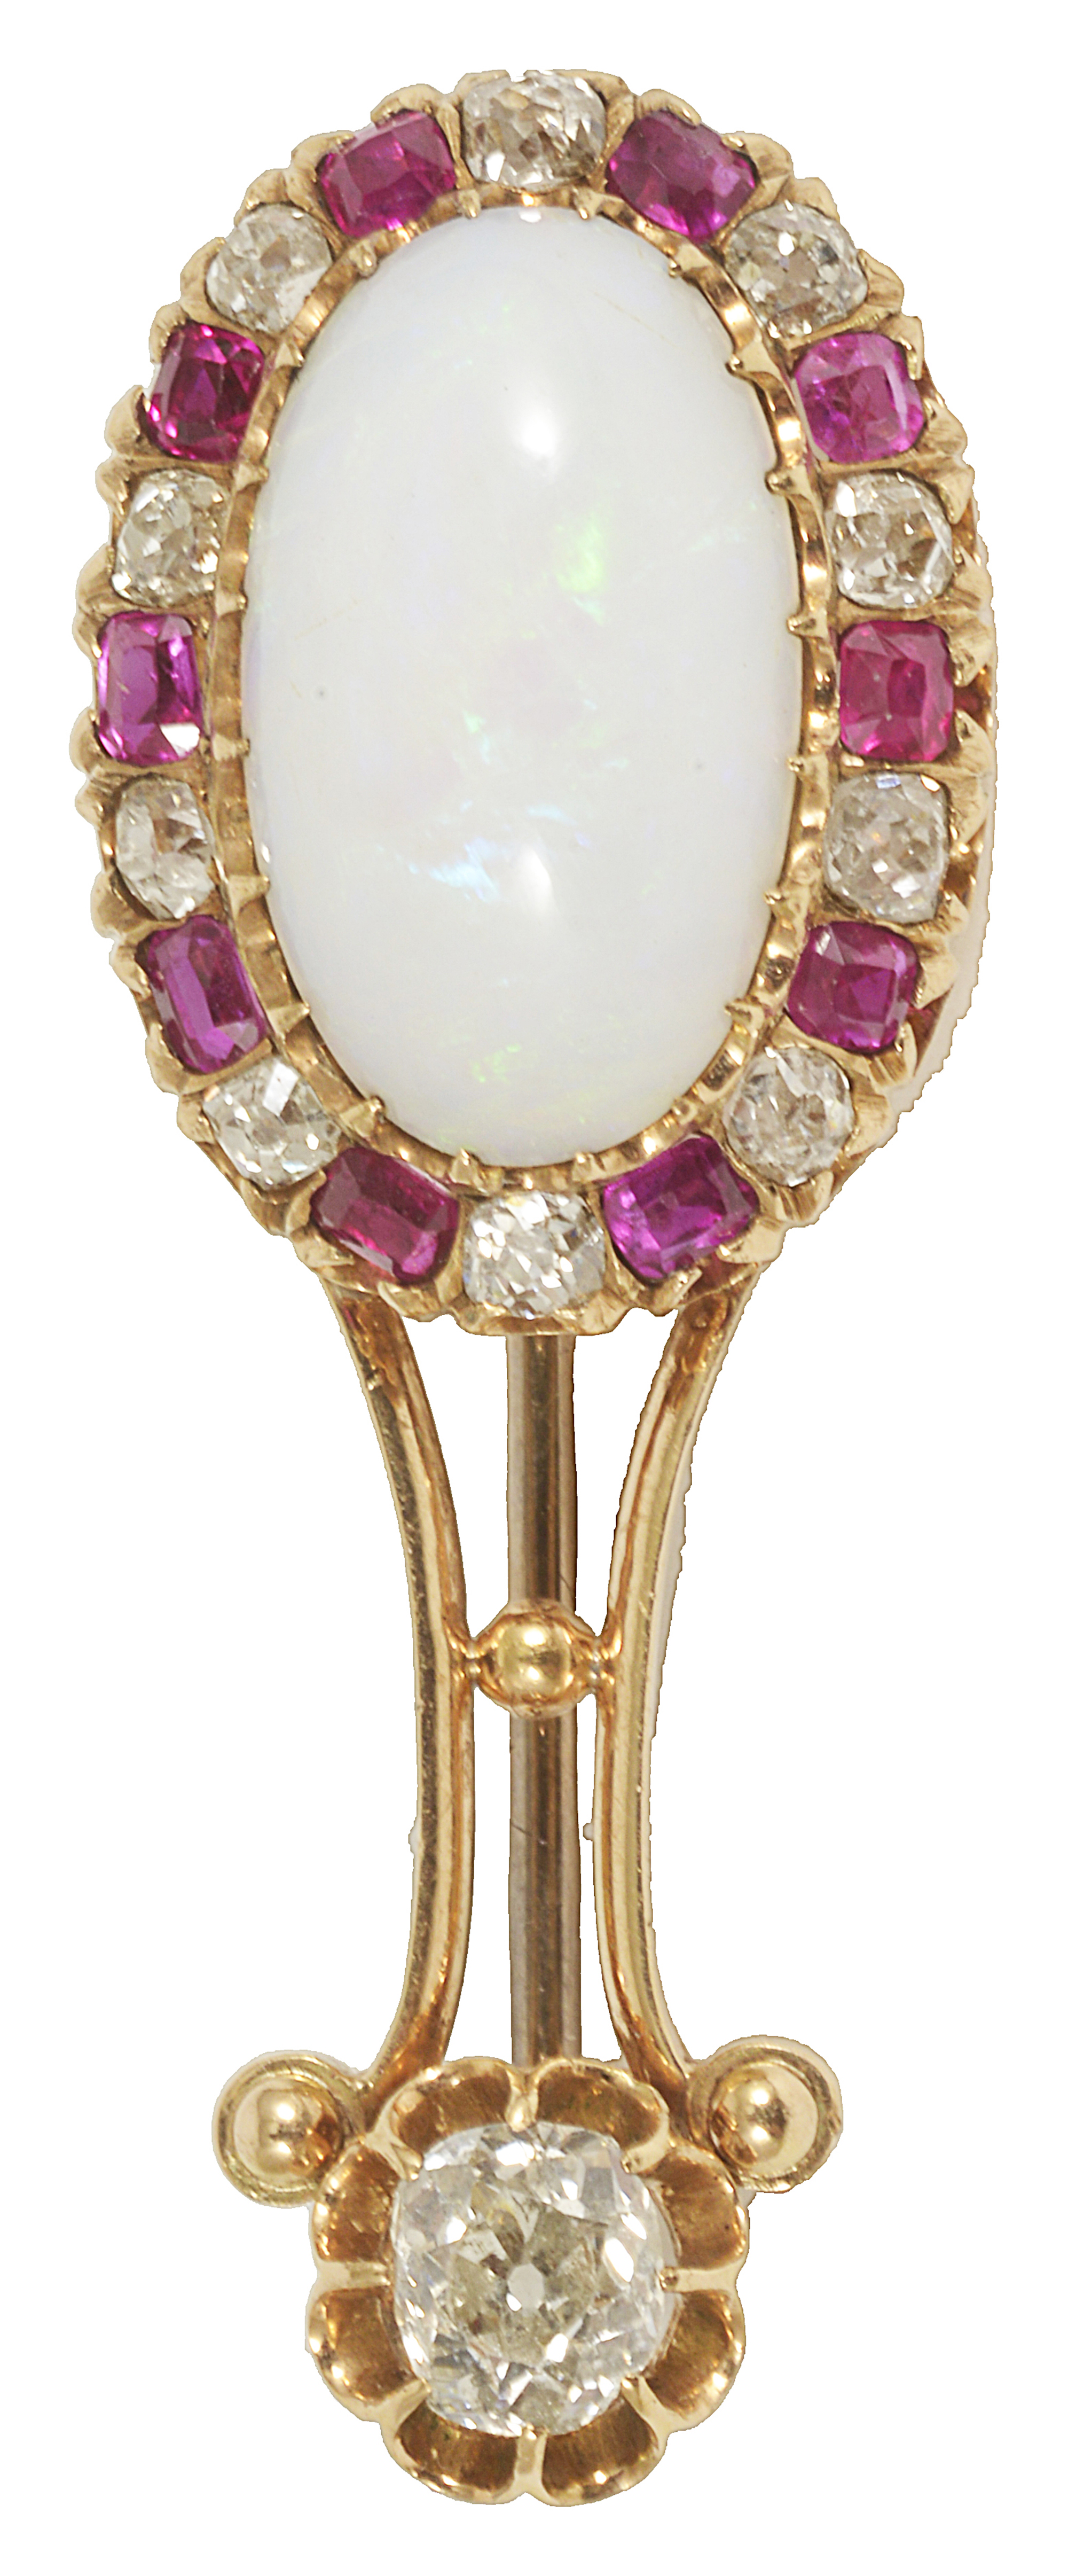 A Victorian precious opal, ruby and diamond set broochhaving large oval opal set within a ruby and